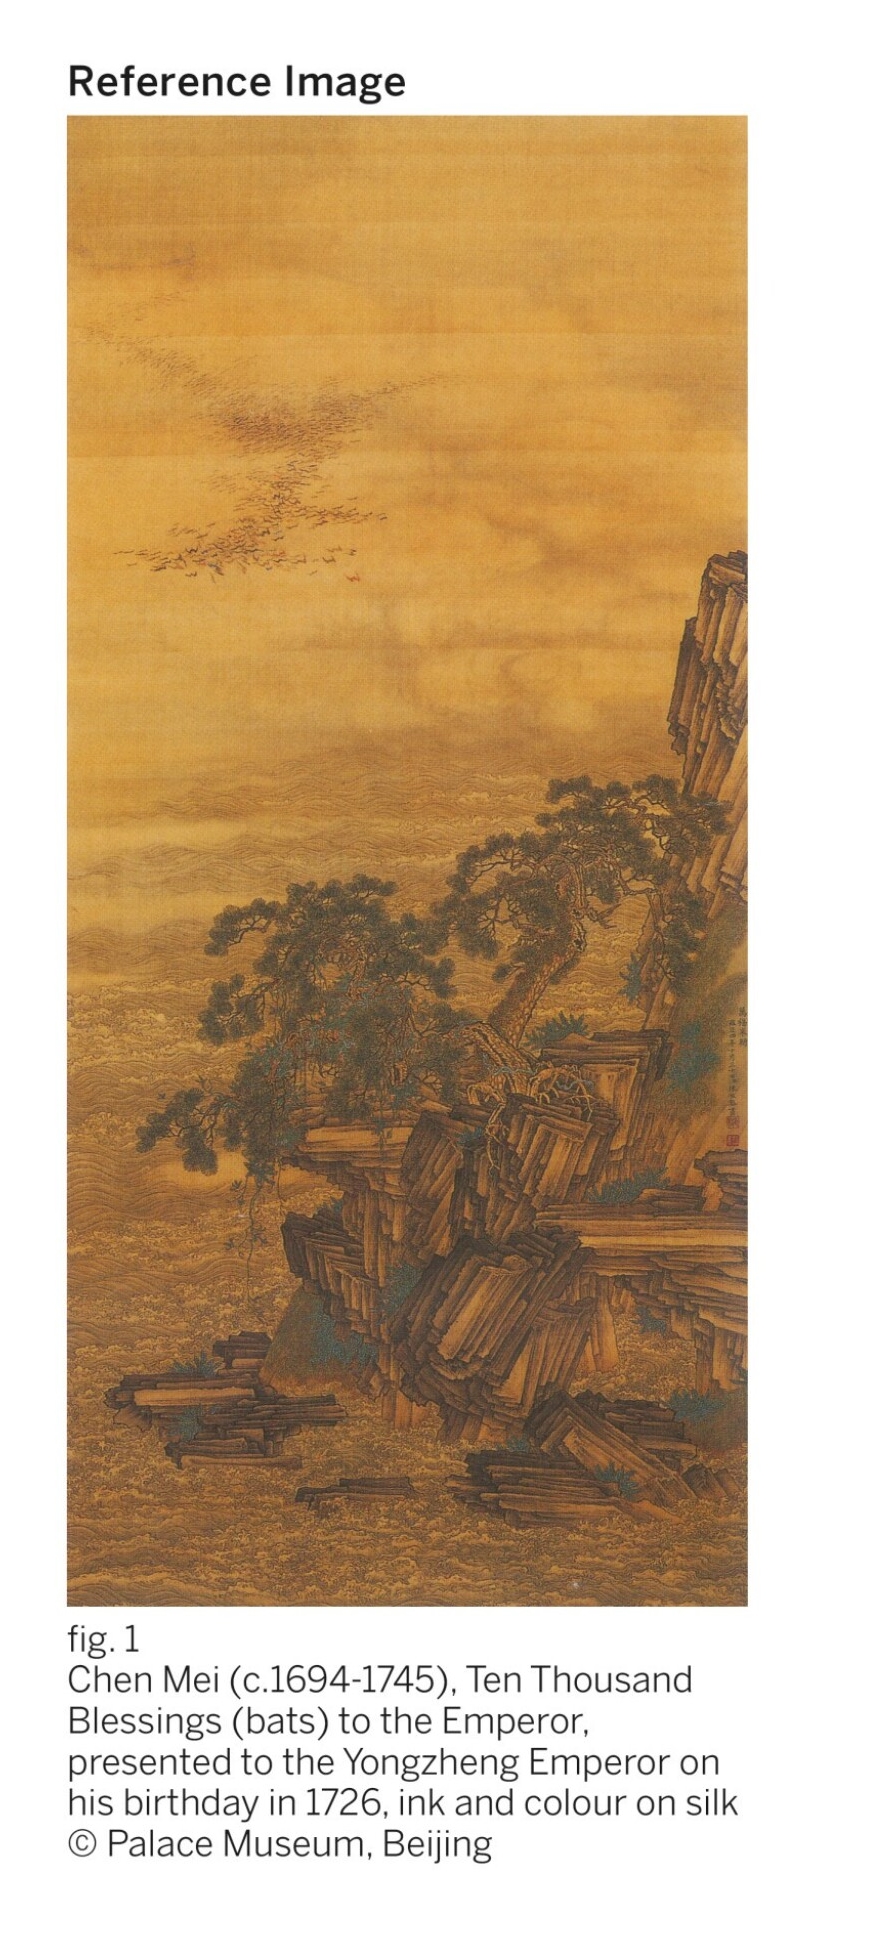  FIG. 1 CHEN MEI (C.1694-1745), TEN THOUSAND BLESSINGS (BATS) TO THE EMPEROR, PRESENTED TO THE YONGZHENG EMPEROR ON HIS BIRTHDAY IN 1726, INK AND COLOUR ON SILK © PALACE MUSEUM, BEIJING 圖一 清雍正四年　陳枚《萬福來朝》軸　絹本設色　為雍正壽慶製　 © 北京故宮博物院